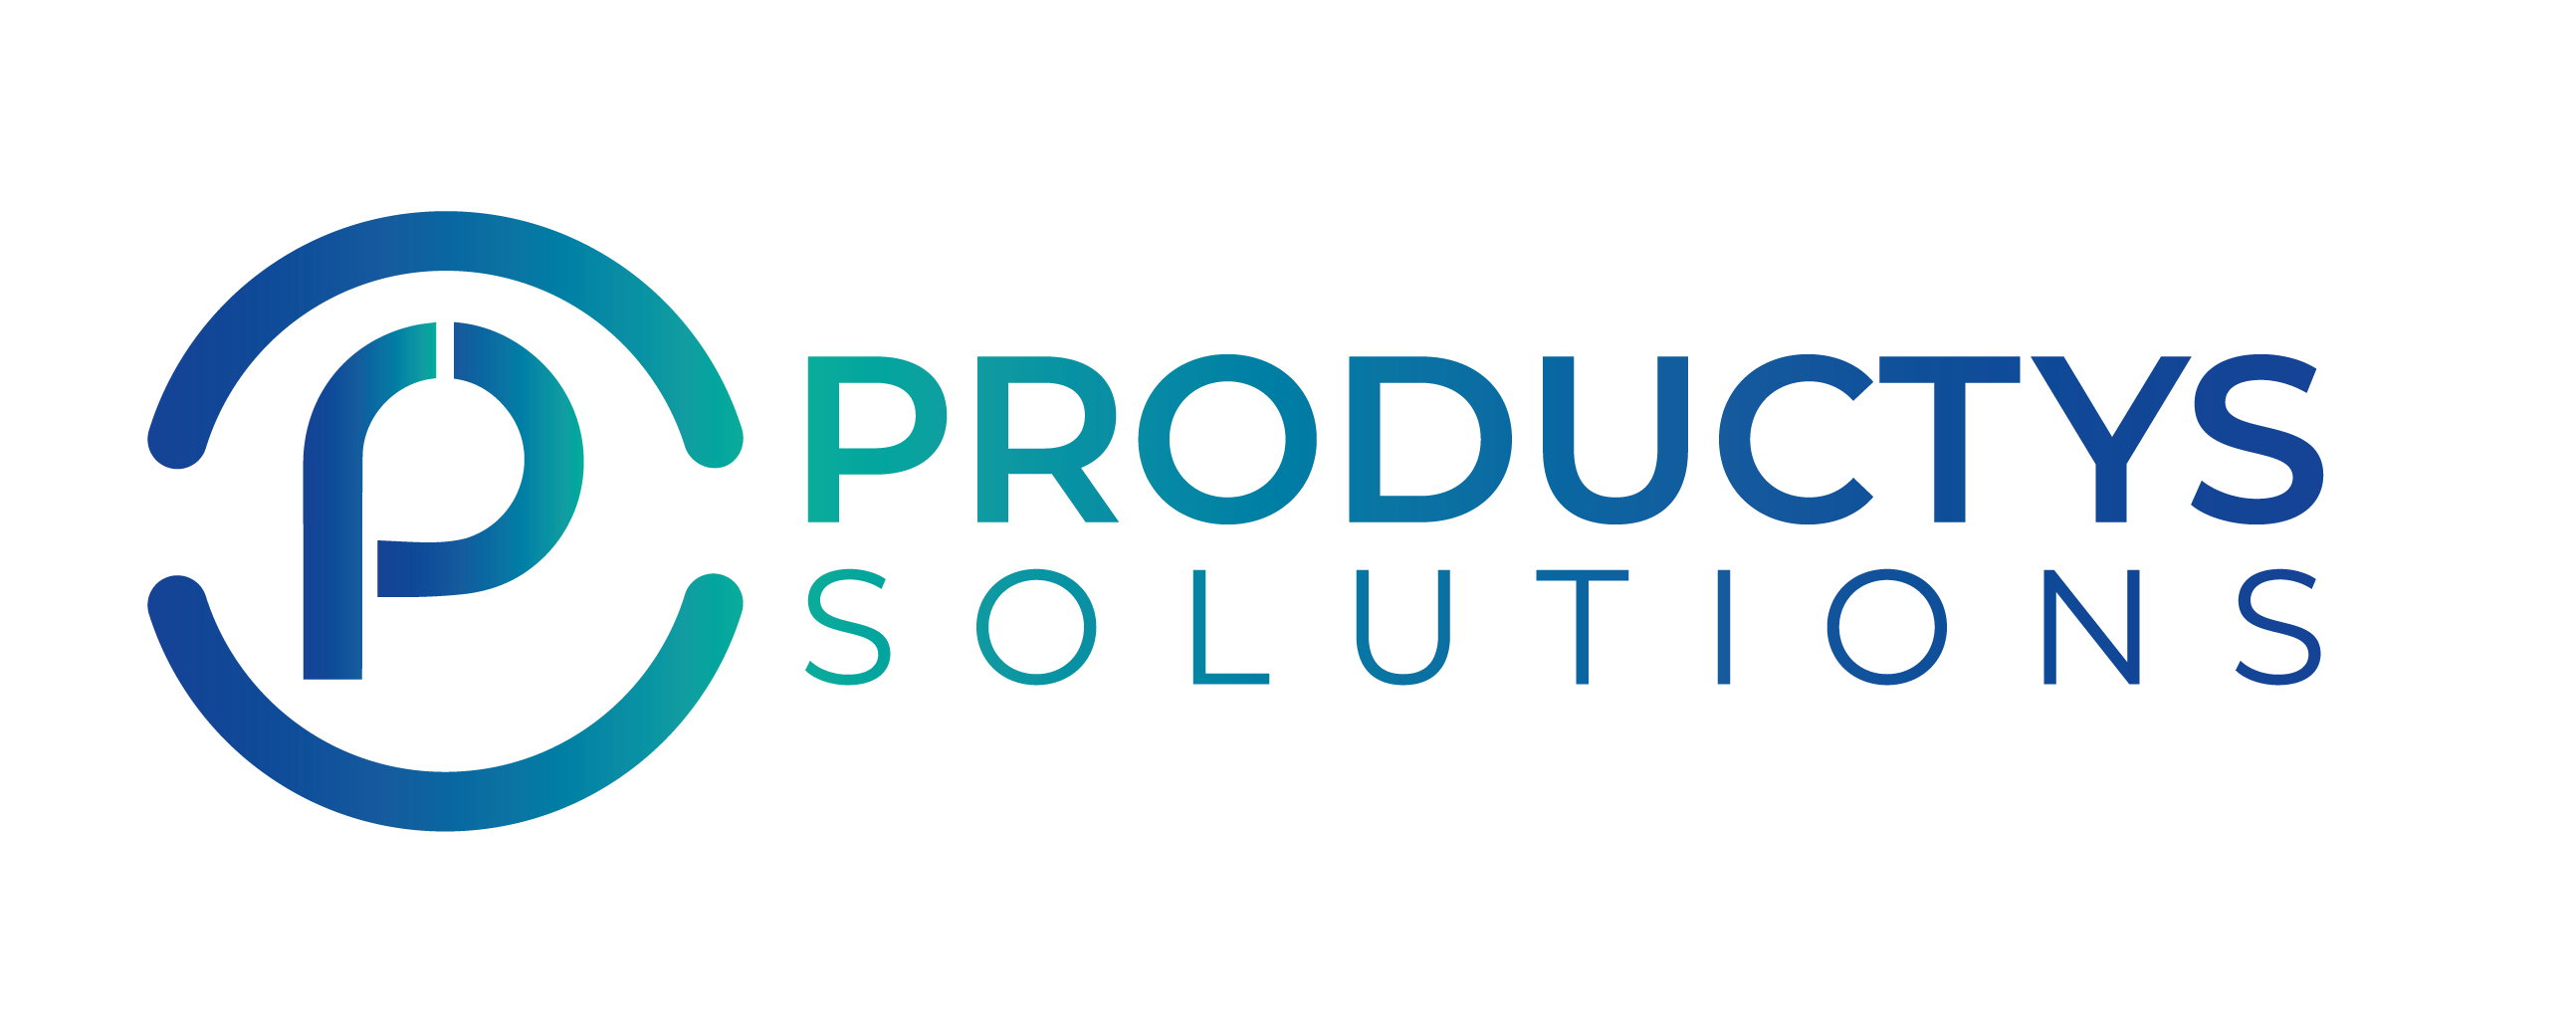 Productys Solutions